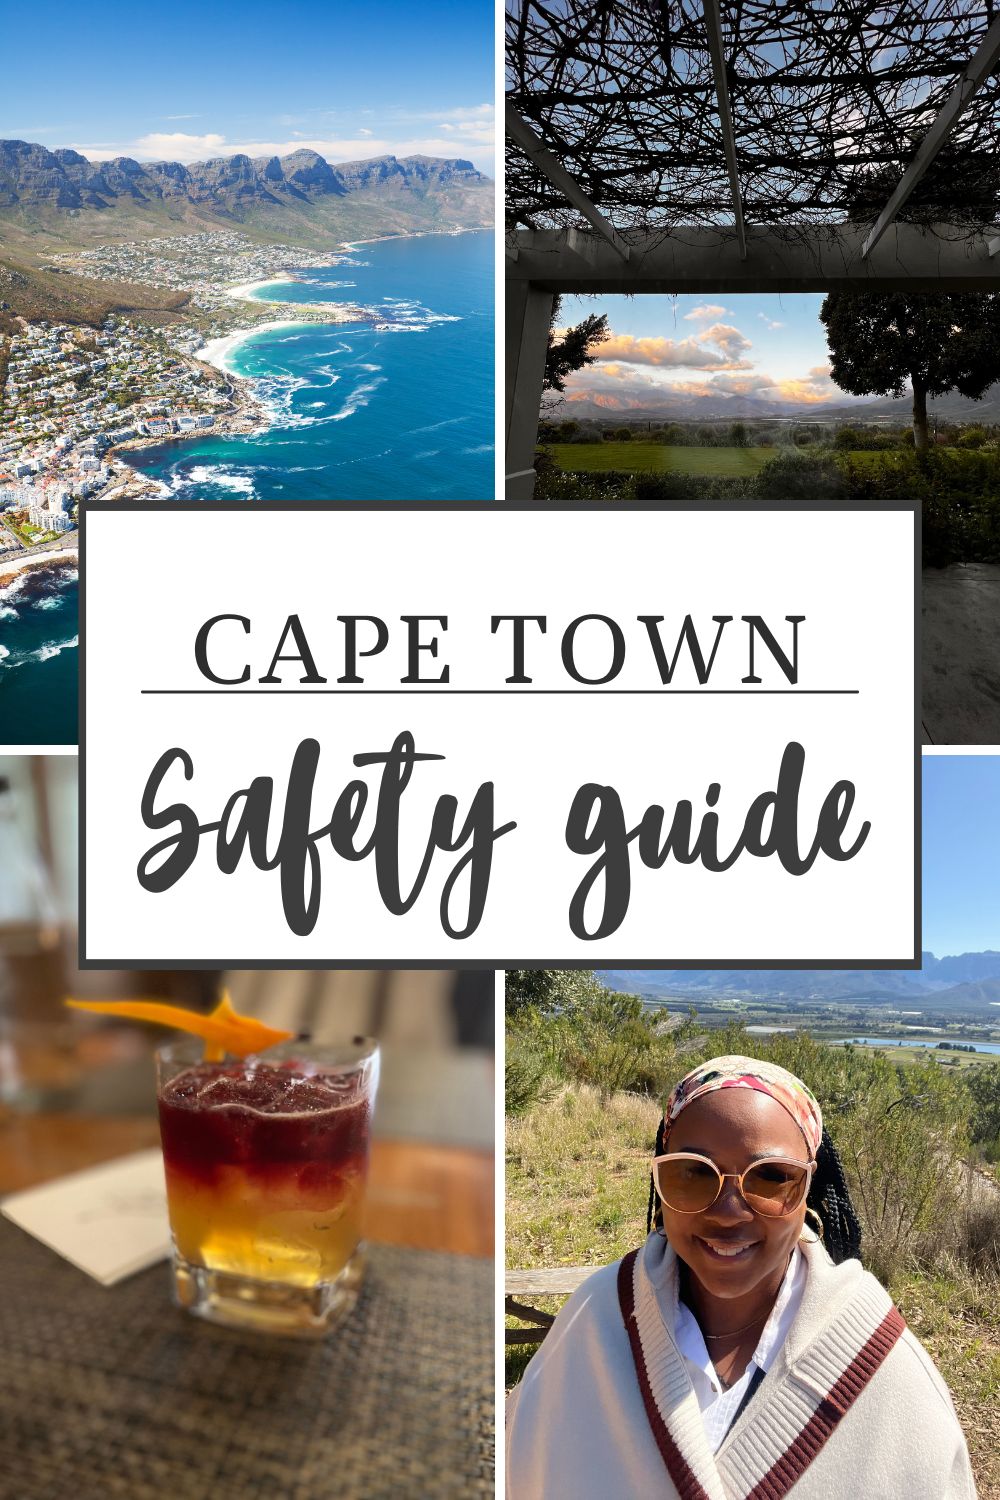 Is Cape town safe